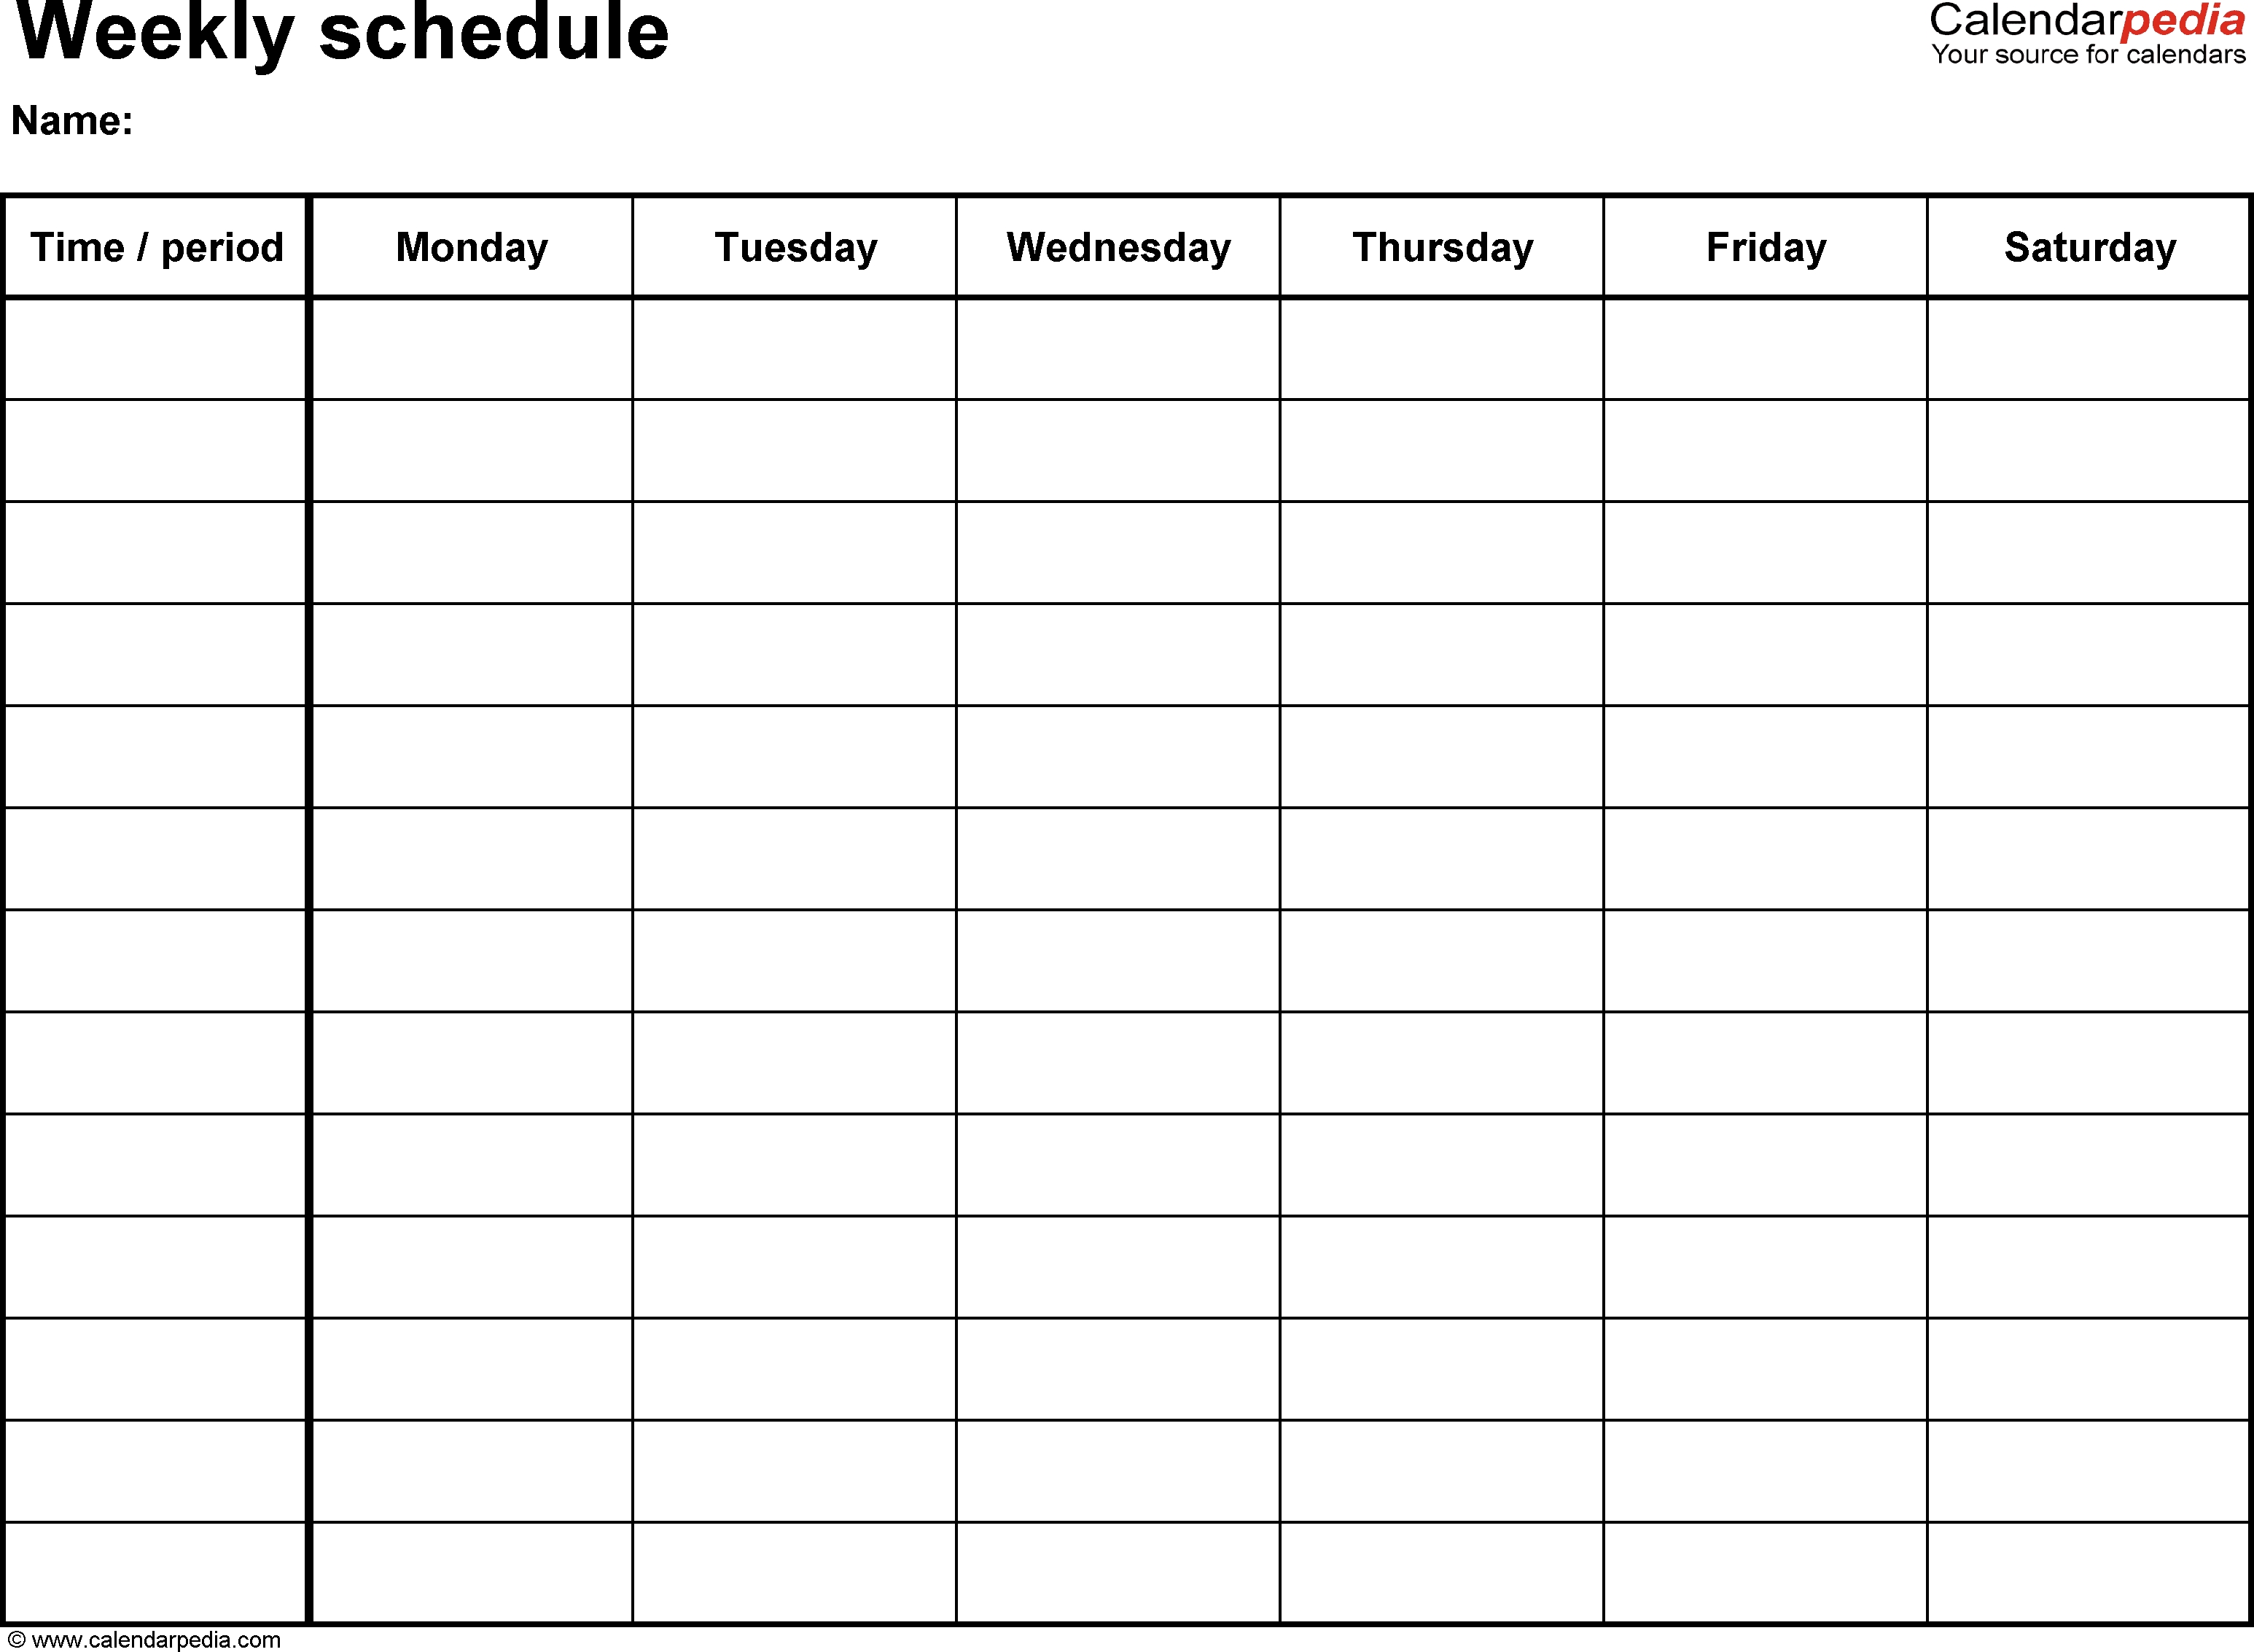 Free Weekly Schedule Templates For Word - 18 Templates Impressive Monday Through Friday Blank Calendar